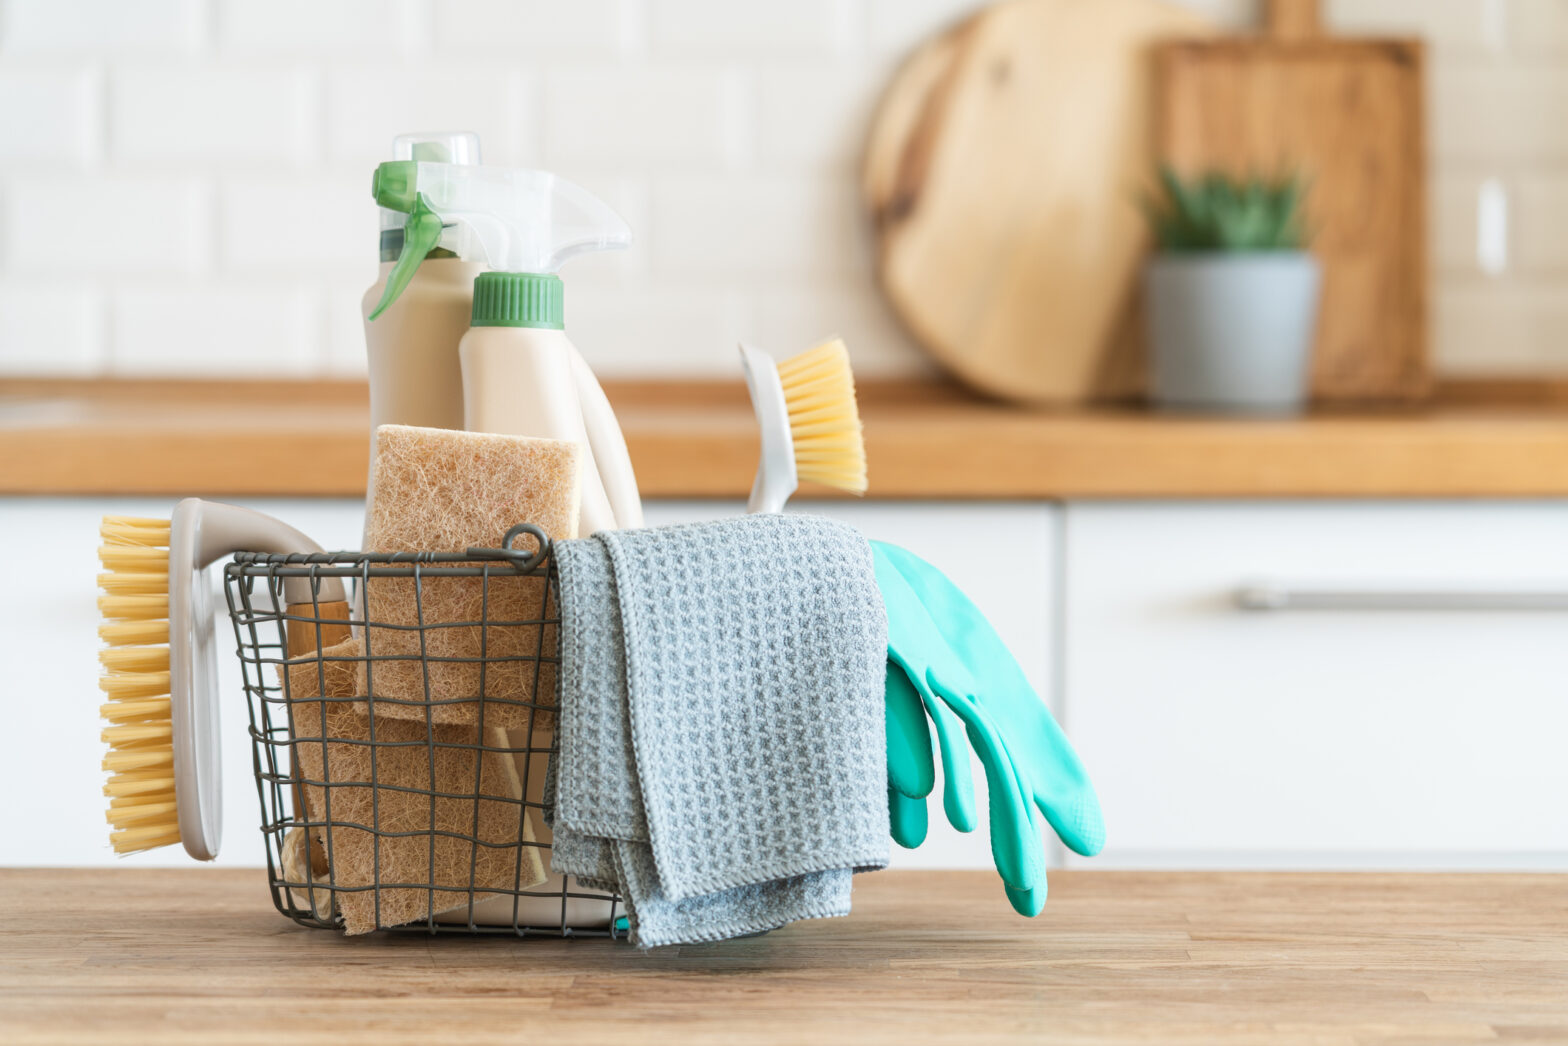 Spring Cleaning: How to Get Started and Stay Motivated